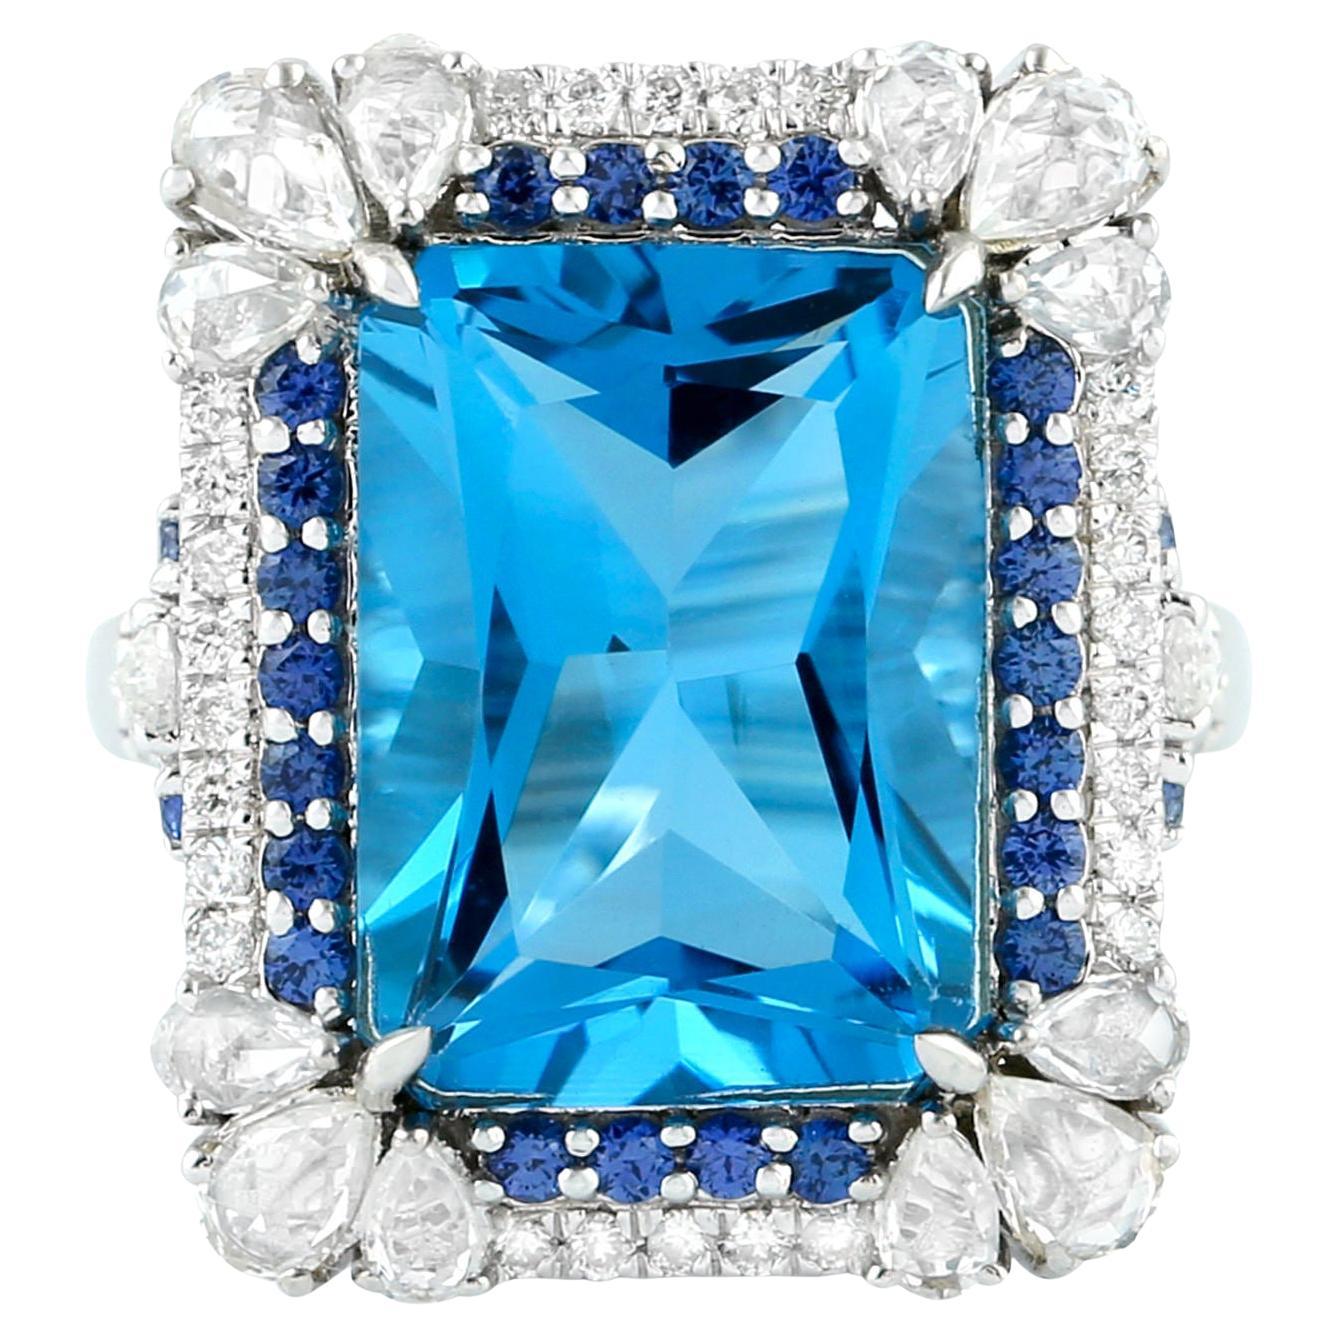 Blue Topaz Ring With Sapphires and Diamonds 13.14 Carats 18K White Gold For Sale